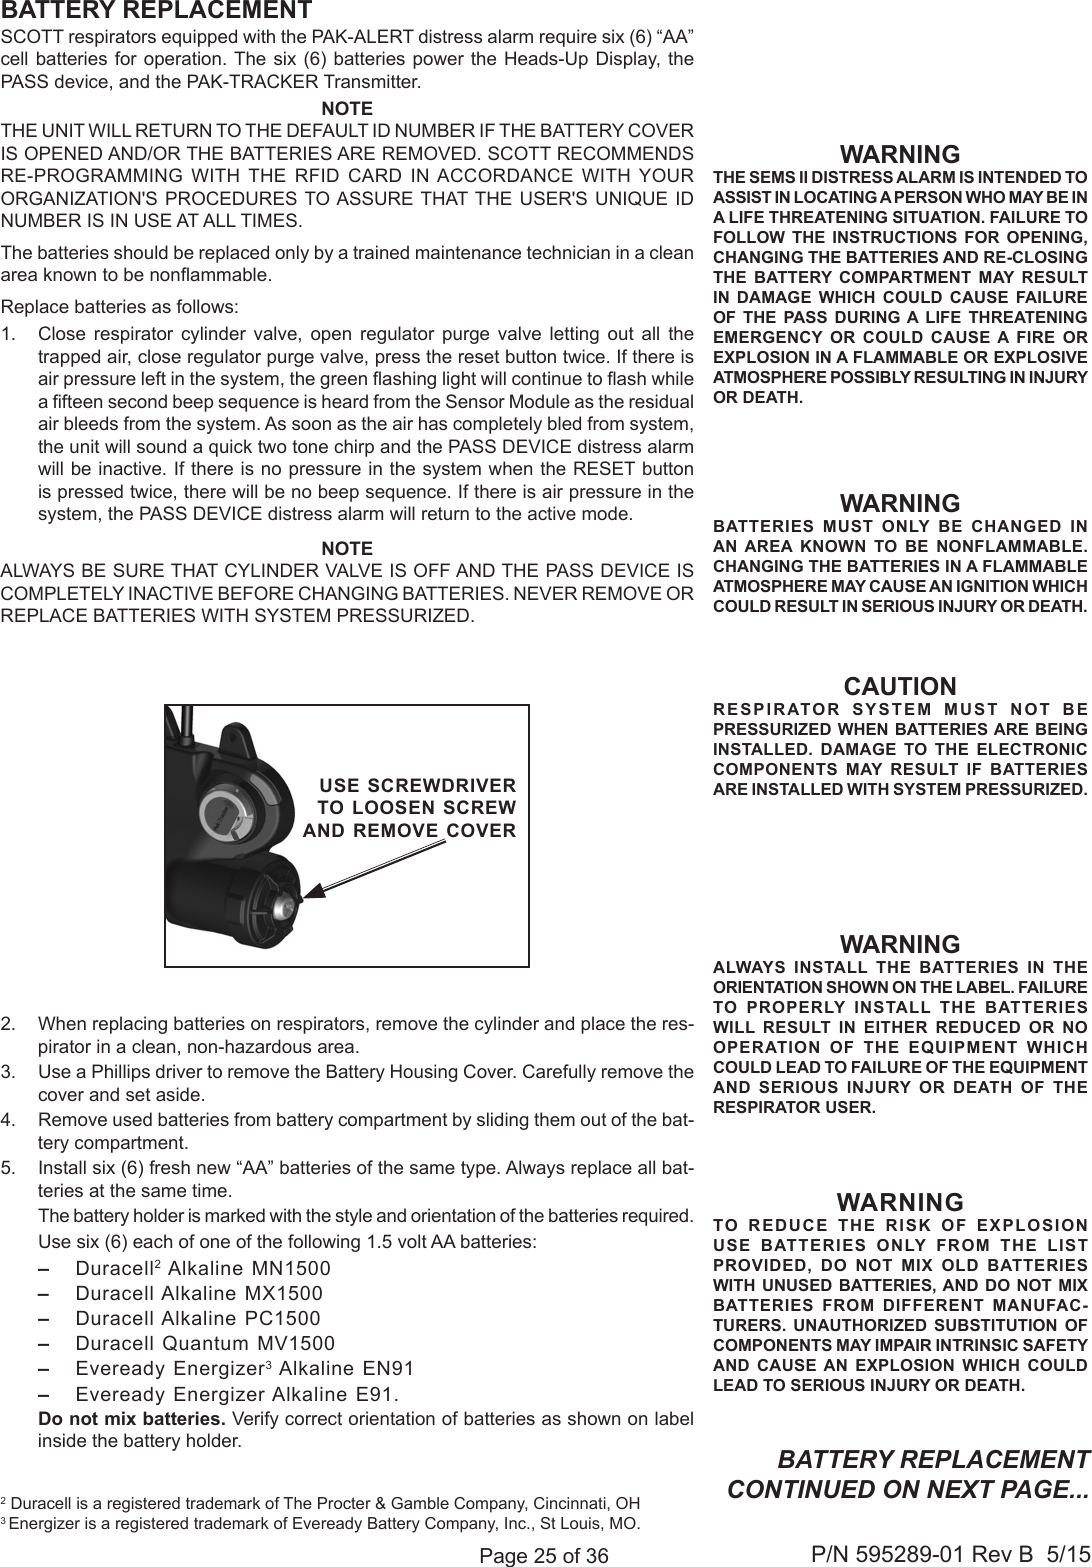 Page 25 of 36P/N 595289-01 Rev B  5/15CAUTIONRESPIRATOR SYSTEM MUST NOT BE PRESSURIZED WHEN BATTERIES ARE BEING INSTALLED. DAMAGE TO THE ELECTRONIC COMPONENTS MAY RESULT IF BATTERIES ARE INSTALLED WITH SYSTEM PRESSURIZED.SCOTT respirators equipped with the PAK-ALERT distress alarm require six (6) “AA” cell batteries for operation. The six (6) batteries power the Heads-Up Display, the PASS device, and the PAK-TRACKER Transmitter. NOTETHE UNIT WILL RETURN TO THE DEFAULT ID NUMBER IF THE BATTERY COVER IS OPENED AND/OR THE BATTERIES ARE REMOVED. SCOTT RECOMMENDS RE-PROGRAMMING WITH THE RFID CARD IN ACCORDANCE WITH YOUR ORGANIZATION&apos;S PROCEDURES TO ASSURE THAT THE USER&apos;S UNIQUE ID NUMBER IS IN USE AT ALL TIMES.The batteries should be replaced only by a trained maintenance technician in a clean area known to be nonammable. Replace batteries as follows:1.  Close respirator cylinder valve, open regulator purge valve letting out all the trapped air, close regulator purge valve, press the reset button twice. If there is air pressure left in the system, the green ashing light will continue to ash while a fteen second beep sequence is heard from the Sensor Module as the residual air bleeds from the system. As soon as the air has completely bled from system, the unit will sound a quick two tone chirp and the PASS DEVICE distress alarm will be inactive. If there is no pressure in the system when the RESET button is pressed twice, there will be no beep sequence. If there is air pressure in the system, the PASS DEVICE distress alarm will return to the active mode.NOTEALWAYS BE SURE THAT CYLINDER VALVE IS OFF AND THE PASS DEVICE IS COMPLETELY INACTIVE BEFORE CHANGING BATTERIES. NEVER REMOVE OR REPLACE BATTERIES WITH SYSTEM PRESSURIZED.2.  When replacing batteries on respirators, remove the cylinder and place the res-pirator in a clean, non-hazardous area.3.  Use a Phillips driver to remove the Battery Housing Cover. Carefully remove the cover and set aside.4.  Remove used batteries from battery compartment by sliding them out of the bat-tery compartment.5.  Install six (6) fresh new “AA” batteries of the same type. Always replace all bat-teries at the same time.   The battery holder is marked with the style and orientation of the batteries required.   Use six (6) each of one of the following 1.5 volt AA batteries: – Duracell2 Alkaline MN1500–  Duracell Alkaline MX1500 –  Duracell Alkaline PC1500 –  Duracell Quantum MV1500–  Eveready Energizer3 Alkaline EN91–  Eveready Energizer Alkaline E91.   Do not mix batteries. Verify correct orientation of batteries as shown on label inside the battery holder.WARNINGTHE SEMS II DISTRESS ALARM IS INTENDED TO ASSIST IN LOCATING A PERSON WHO MAY BE IN A LIFE THREATENING SITUATION. FAILURE TO FOLLOW THE INSTRUCTIONS FOR OPENING, CHANGING THE BATTERIES AND RE-CLOSING THE BATTERY COMPARTMENT MAY RESULT IN DAMAGE WHICH COULD CAUSE FAILURE OF THE PASS DURING A LIFE THREATENING EMERGENCY OR COULD CAUSE A FIRE OR EXPLOSION IN A FLAMMABLE OR EXPLOSIVE ATMOSPHERE POSSIBLY RESULTING IN INJURY OR DEATH. WARNINGBATTERIES MUST ONLY BE CHANGED IN AN AREA KNOWN TO BE NONFLAMMABLE.CHANGING THE BATTERIES IN A FLAMMABLE ATMOSPHERE MAY CAUSE AN IGNITION WHICH COULD RESULT IN SERIOUS INJURY OR DEATH.BATTERY REPLACEMENT2 Duracell is a registered trademark of The Procter &amp; Gamble Company, Cincinnati, OH 3 Energizer is a registered trademark of Eveready Battery Company, Inc., St Louis, MO.WARNINGTO REDUCE THE RISK OF EXPLOSION USE BATTERIES ONLY FROM THE LIST PROVIDED, DO NOT MIX OLD BATTERIES WITH UNUSED BATTERIES, AND DO NOT MIX BATTERIES FROM DIFFERENT MANUFAC-TURERS. UNAUTHORIZED SUBSTITUTION OF COMPONENTS MAY IMPAIR INTRINSIC SAFETY AND CAUSE AN EXPLOSION WHICH COULD LEAD TO SERIOUS INJURY OR DEATH. USE SCREWDRIVERTO LOOSEN SCREW AND REMOVE COVERWARNINGALWAYS INSTALL THE BATTERIES IN THE ORIENTATION SHOWN ON THE LABEL. FAILURE TO PROPERLY INSTALL THE BATTERIES WILL RESULT IN EITHER REDUCED OR NO OPERATION OF THE EQUIPMENT WHICH COULD LEAD TO FAILURE OF THE EQUIPMENT AND SERIOUS INJURY OR DEATH OF THE RESPIRATOR USER.BATTERY REPLACEMENT CONTINUED ON NEXT PAGE...